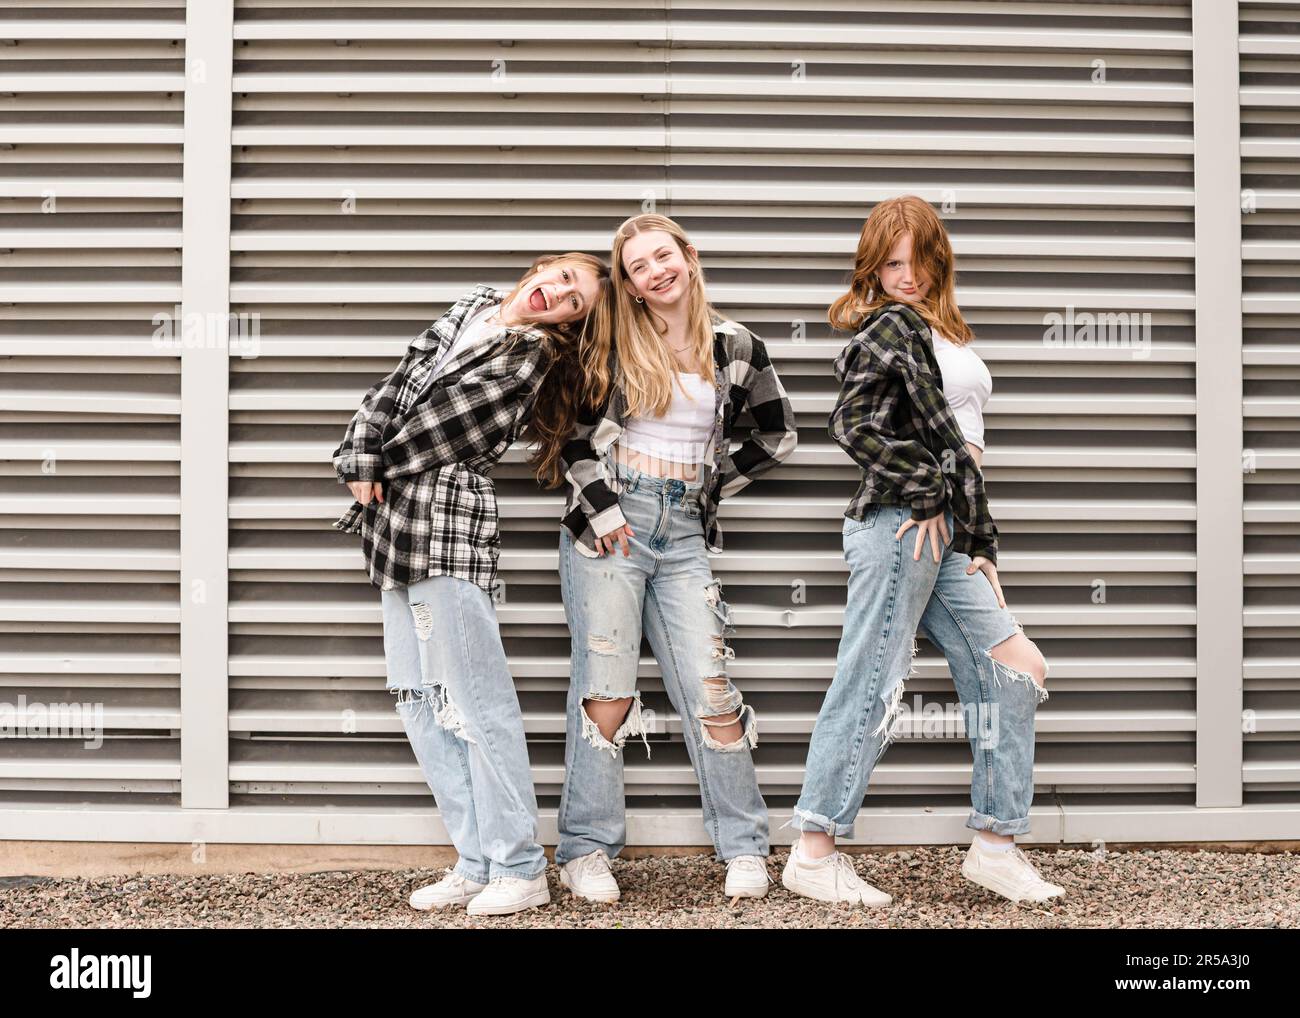 Three happy teen girls posing in front of strong vertical lines. Stock Photo